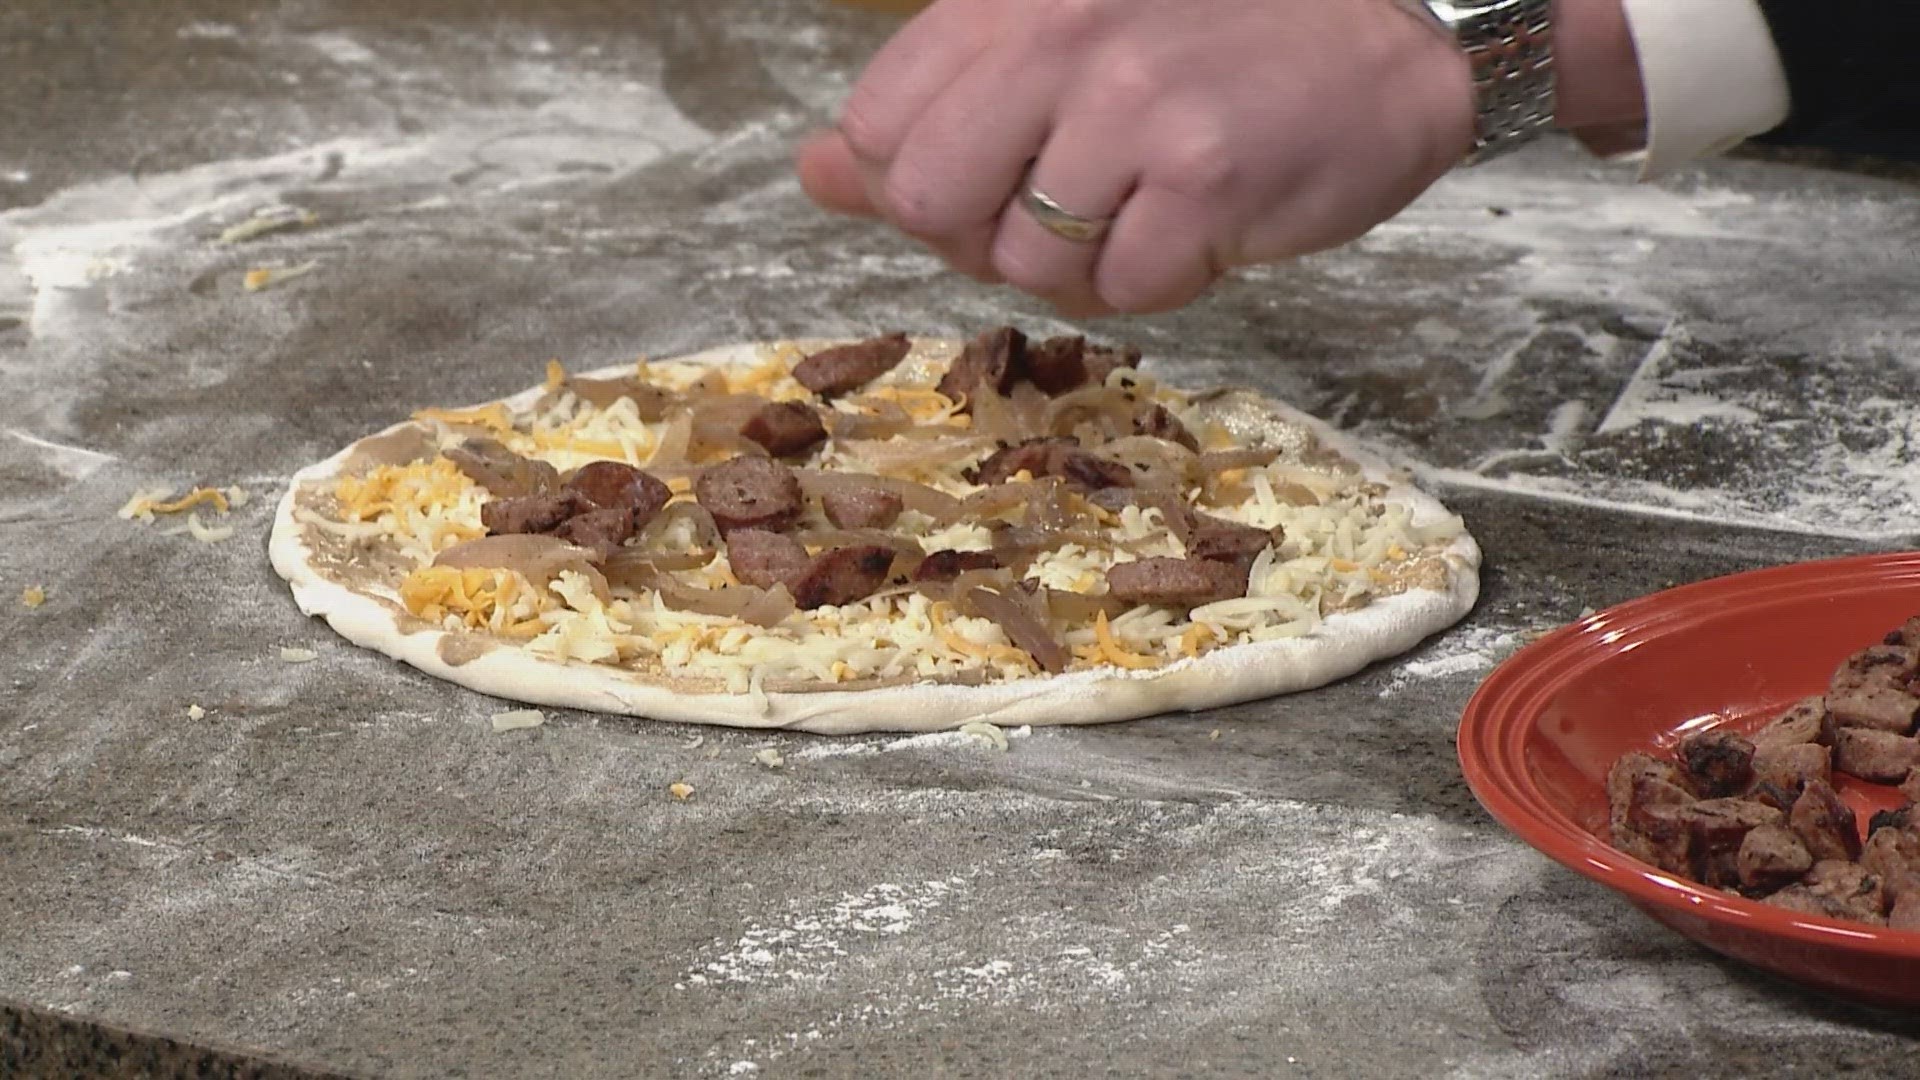 3News' Austin Love has created what he's calling a Cleveland-style pizza. The recipe includes Ballpark Mustard, onions, kielbasa and sauerkraut.